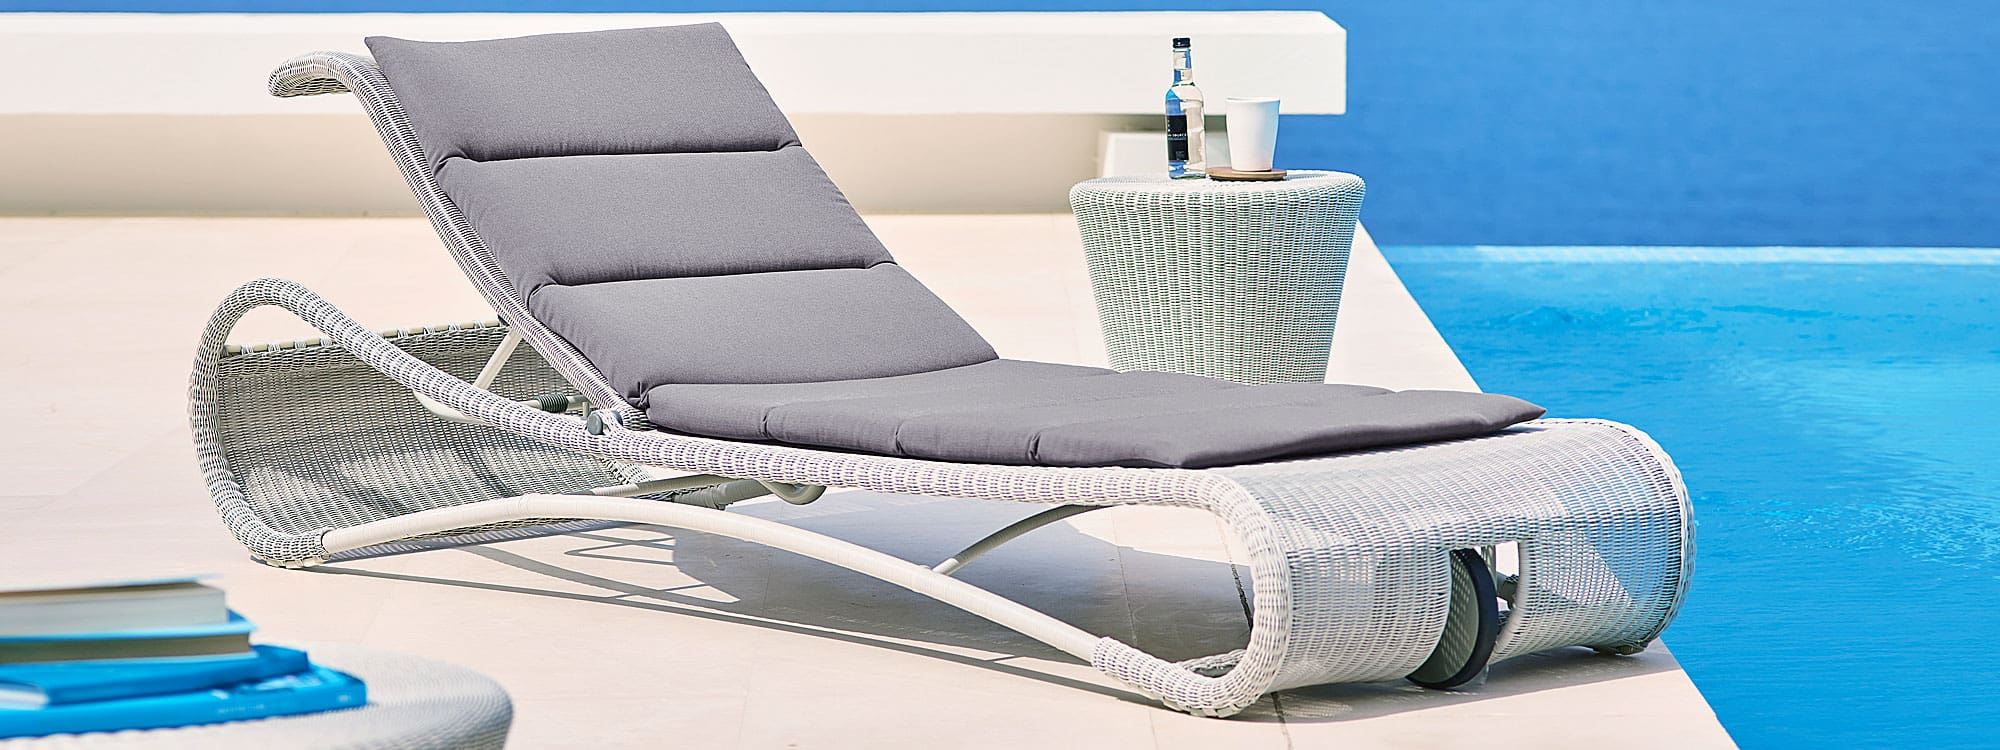 Image of white-grey rattan Escape sunbed with white grey rattan Kingston side table by Cane-line